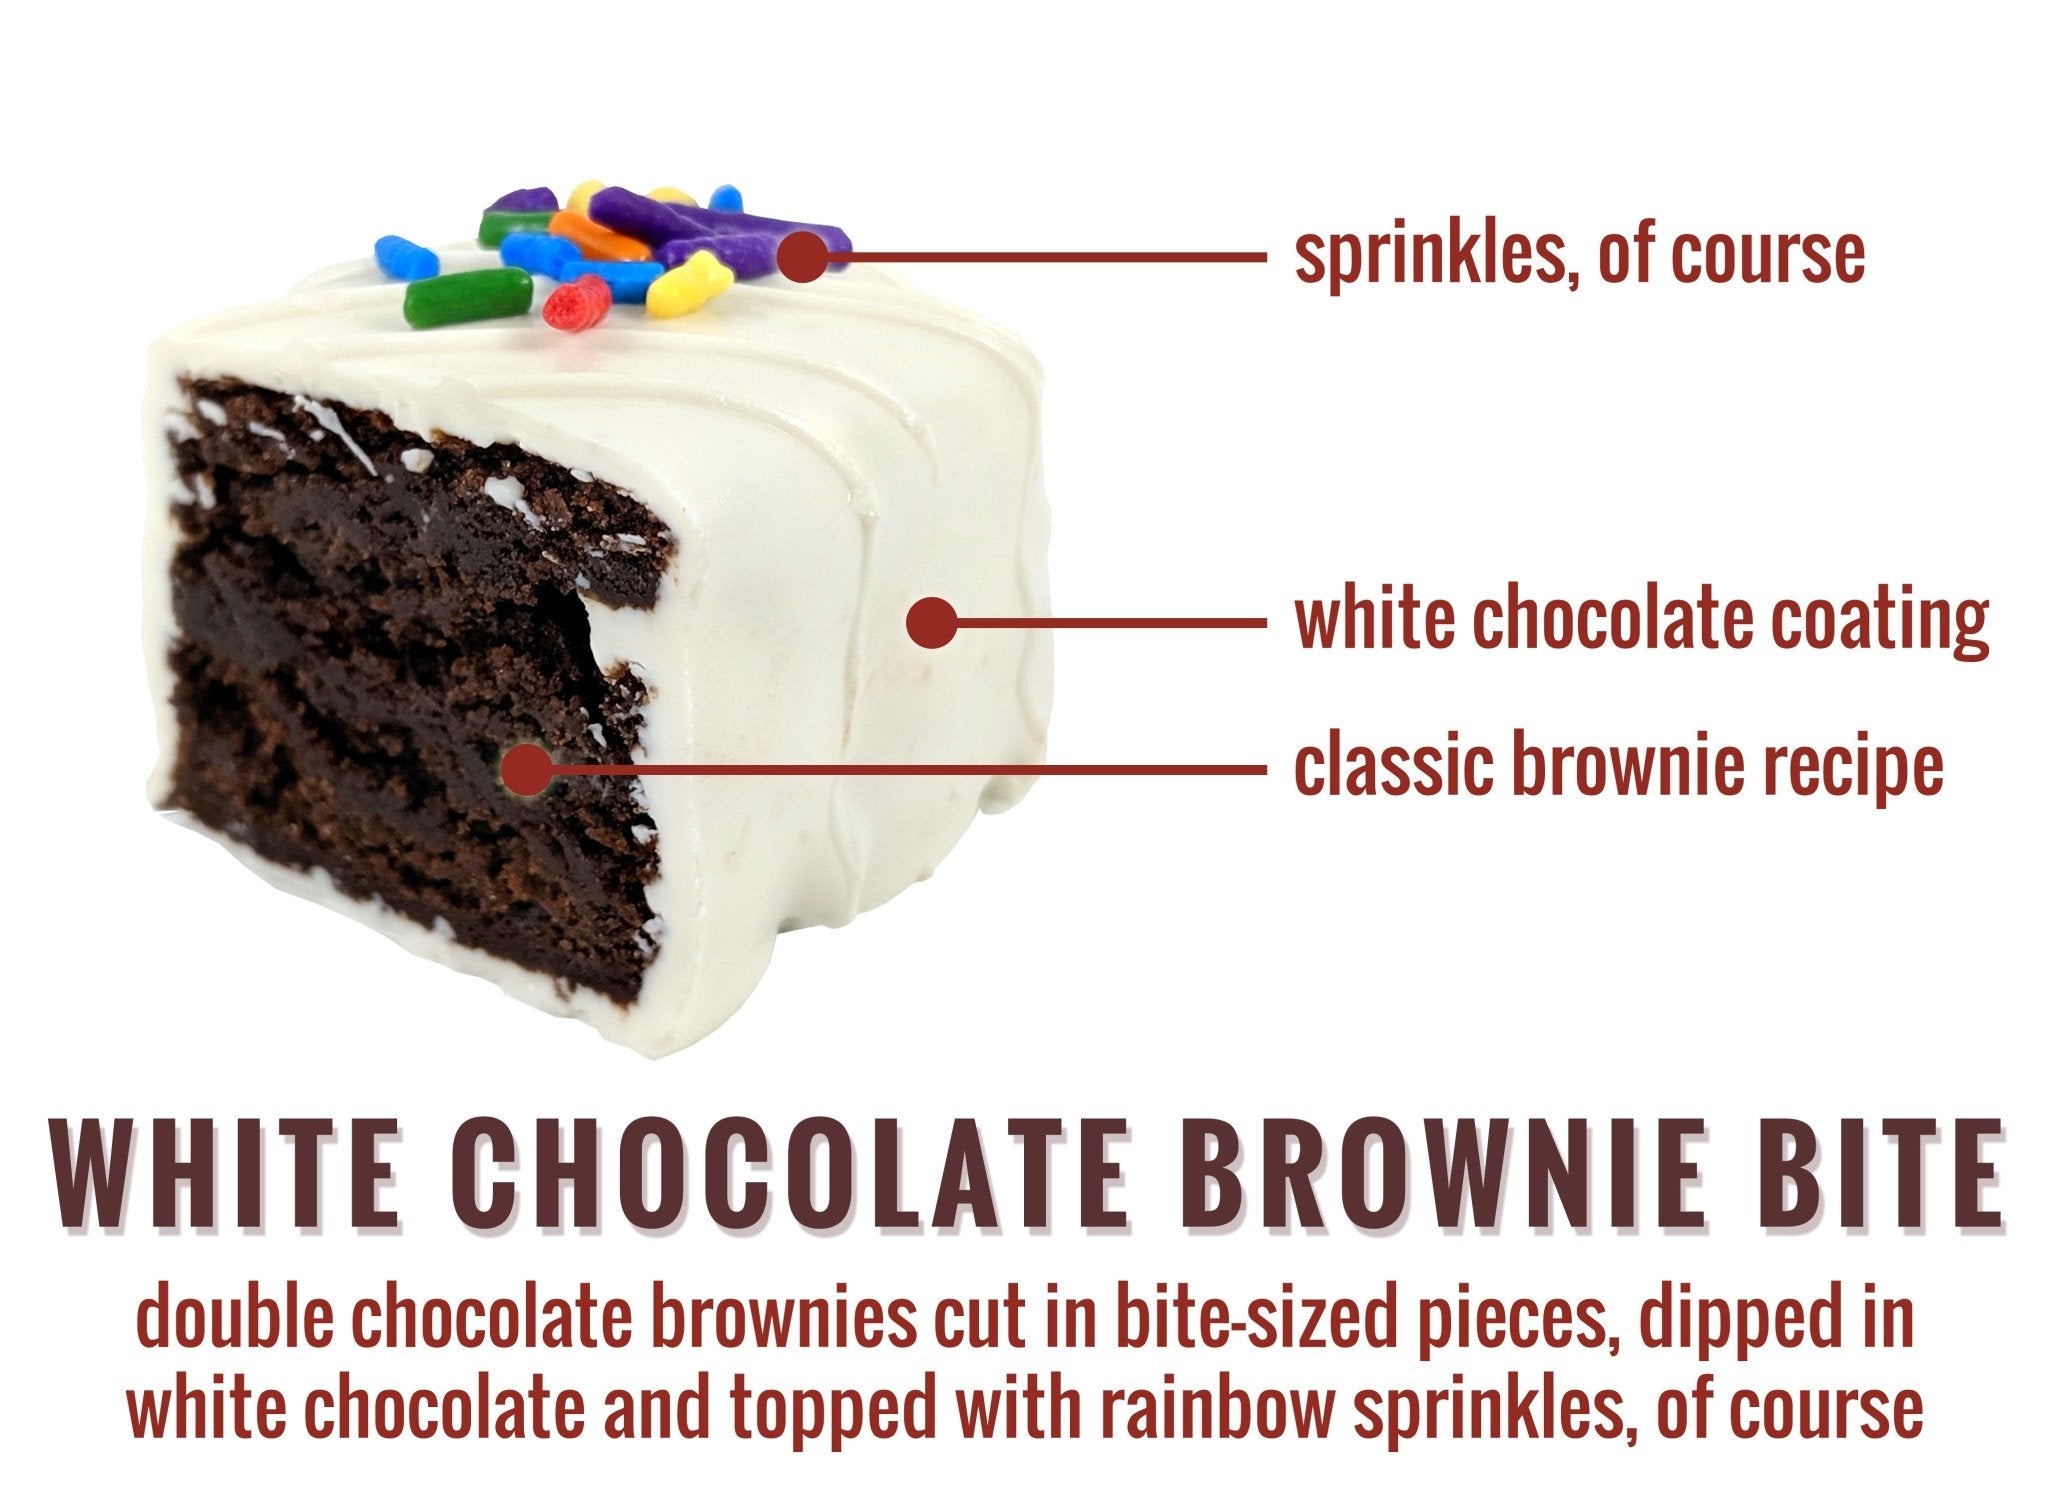 Indulgent Decadence: Crafting the Ultimate Sinful Brownie Sensation